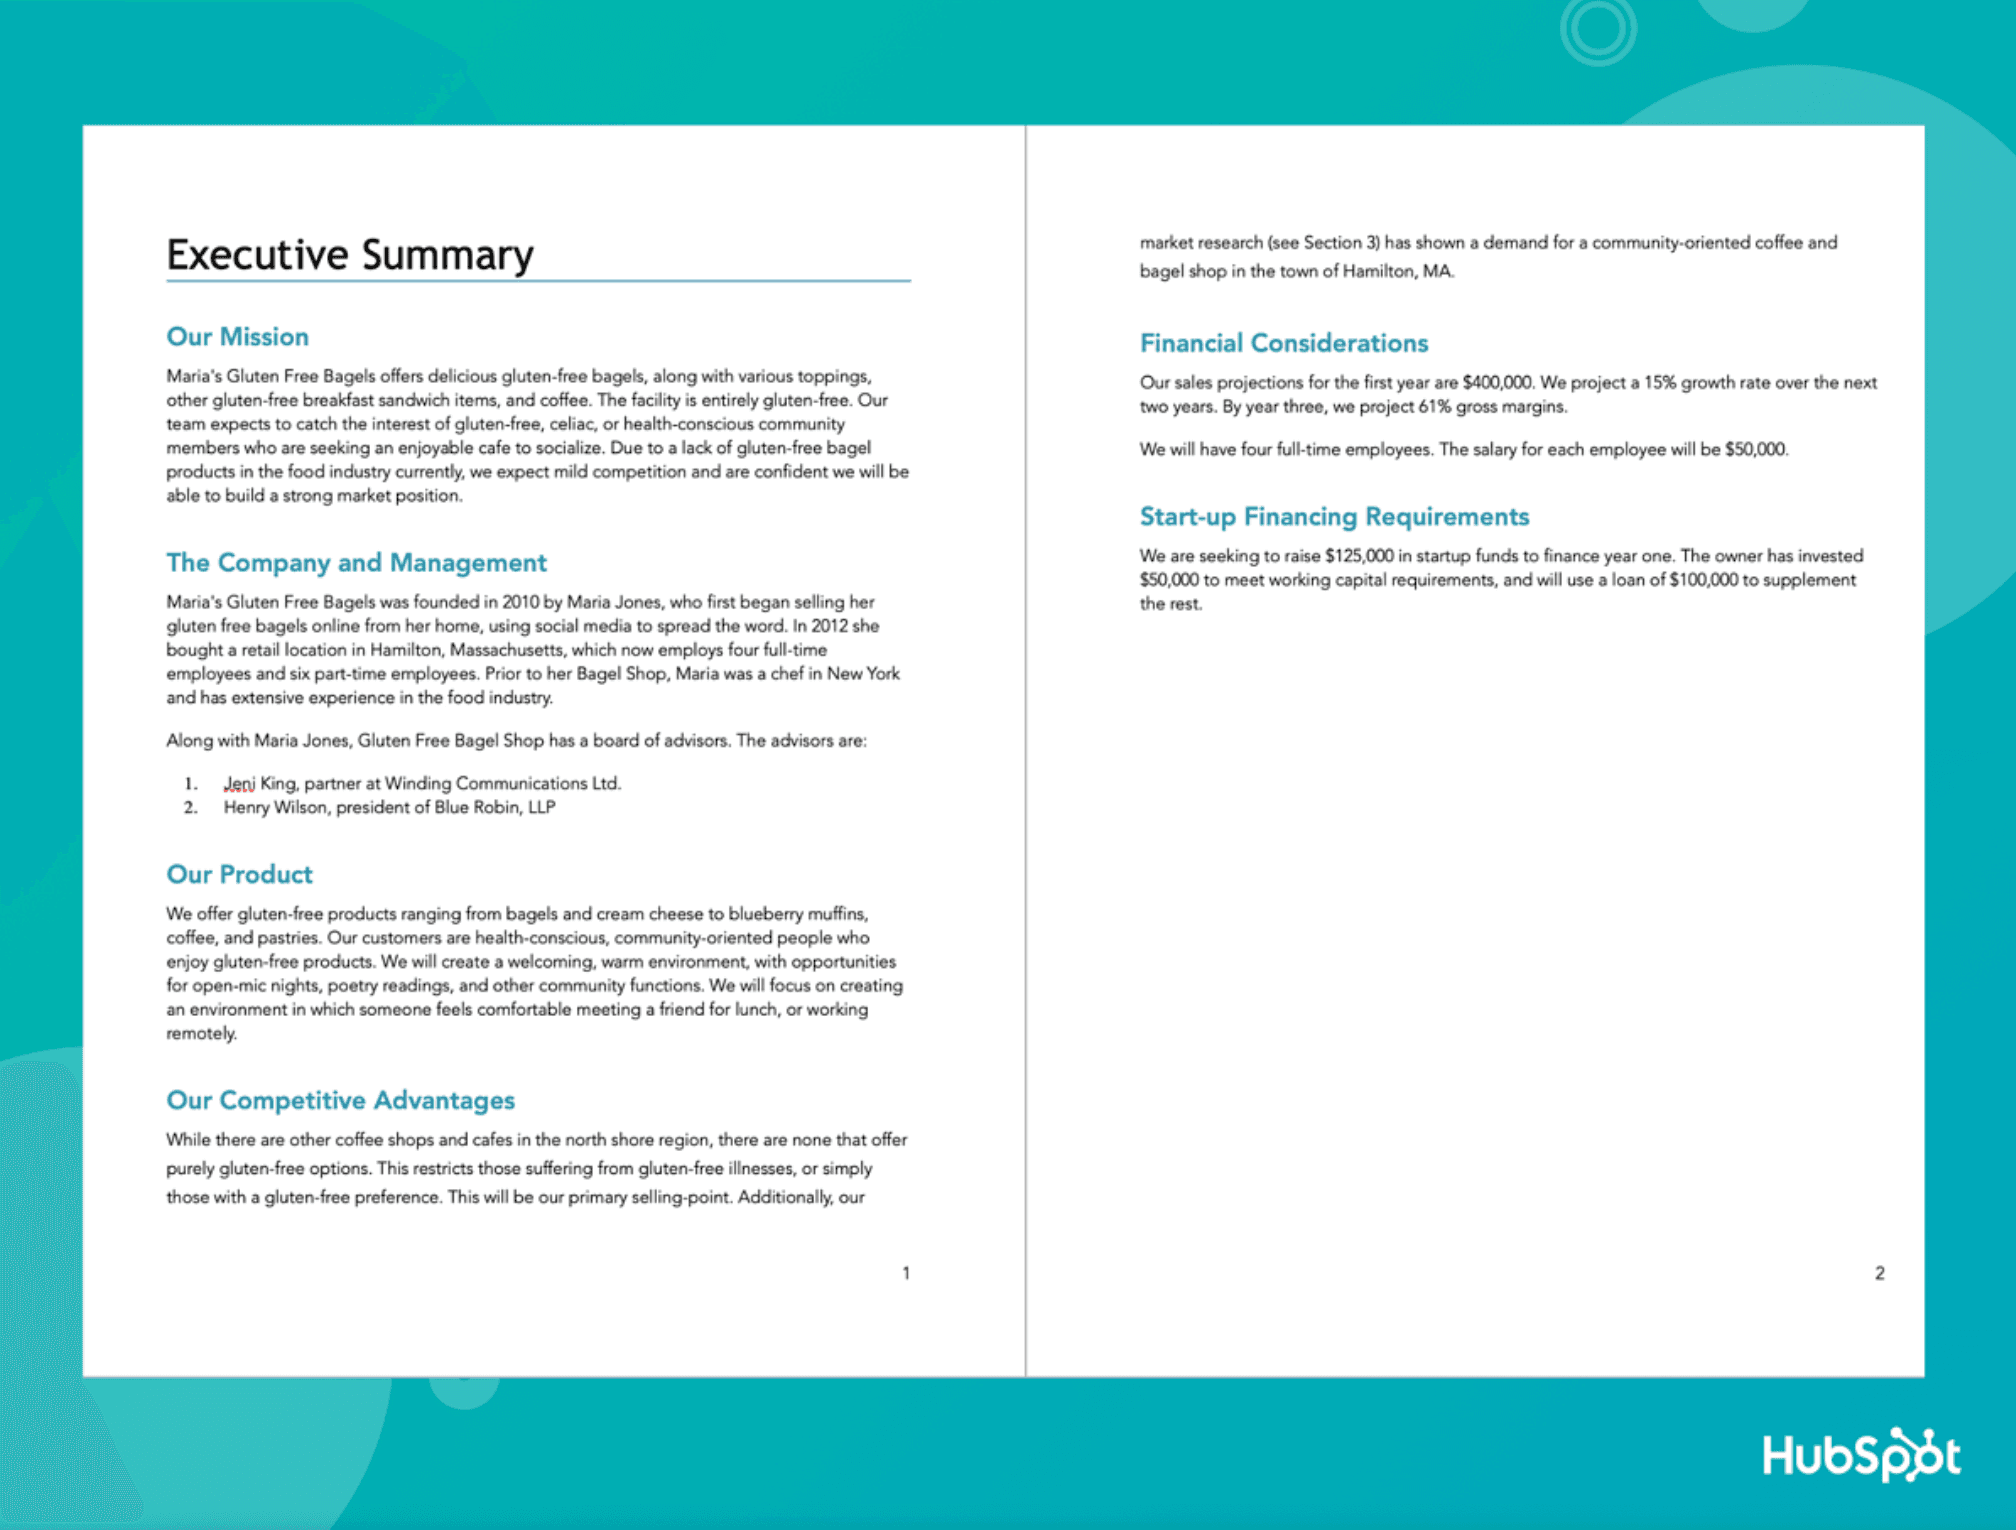 HubSpot's two-page executive summary